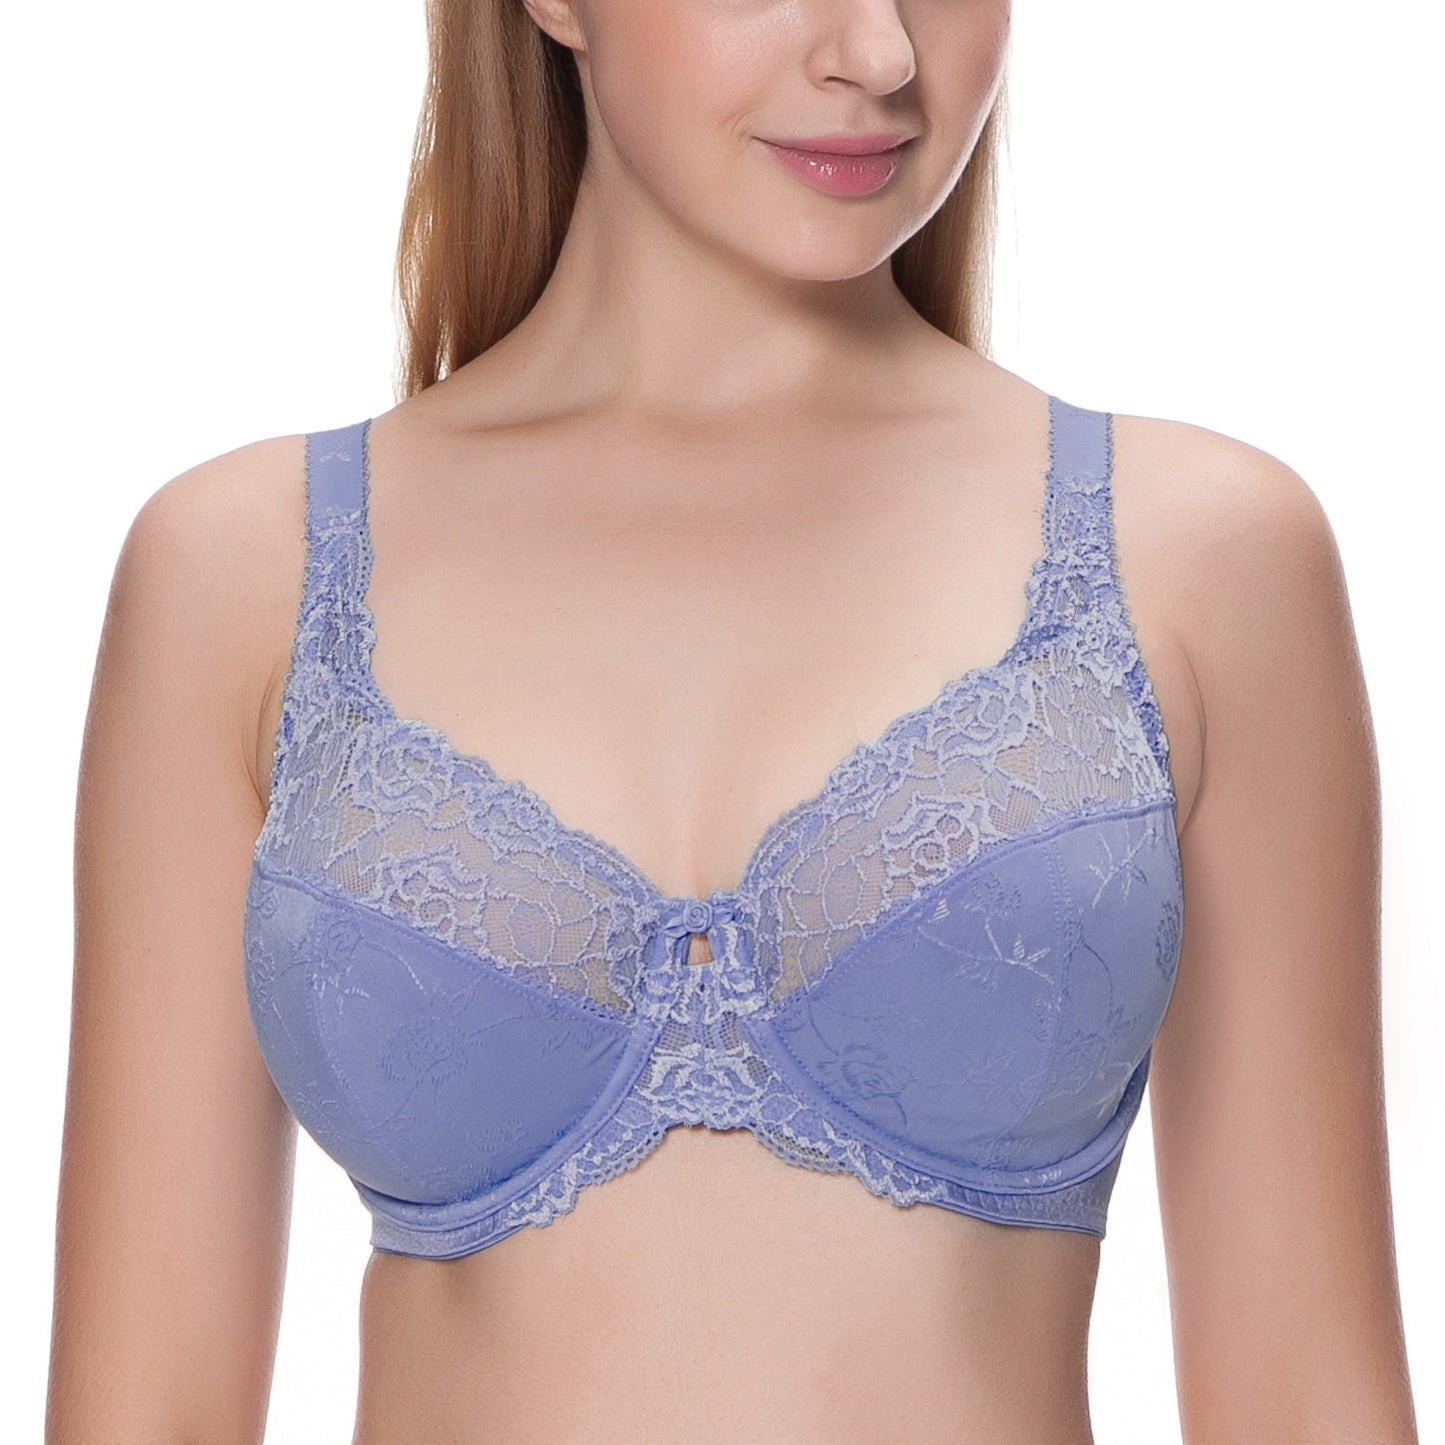 Buy A-GG Coral Supersoft Lace Full Cup Padded Bra - 36C, Bras